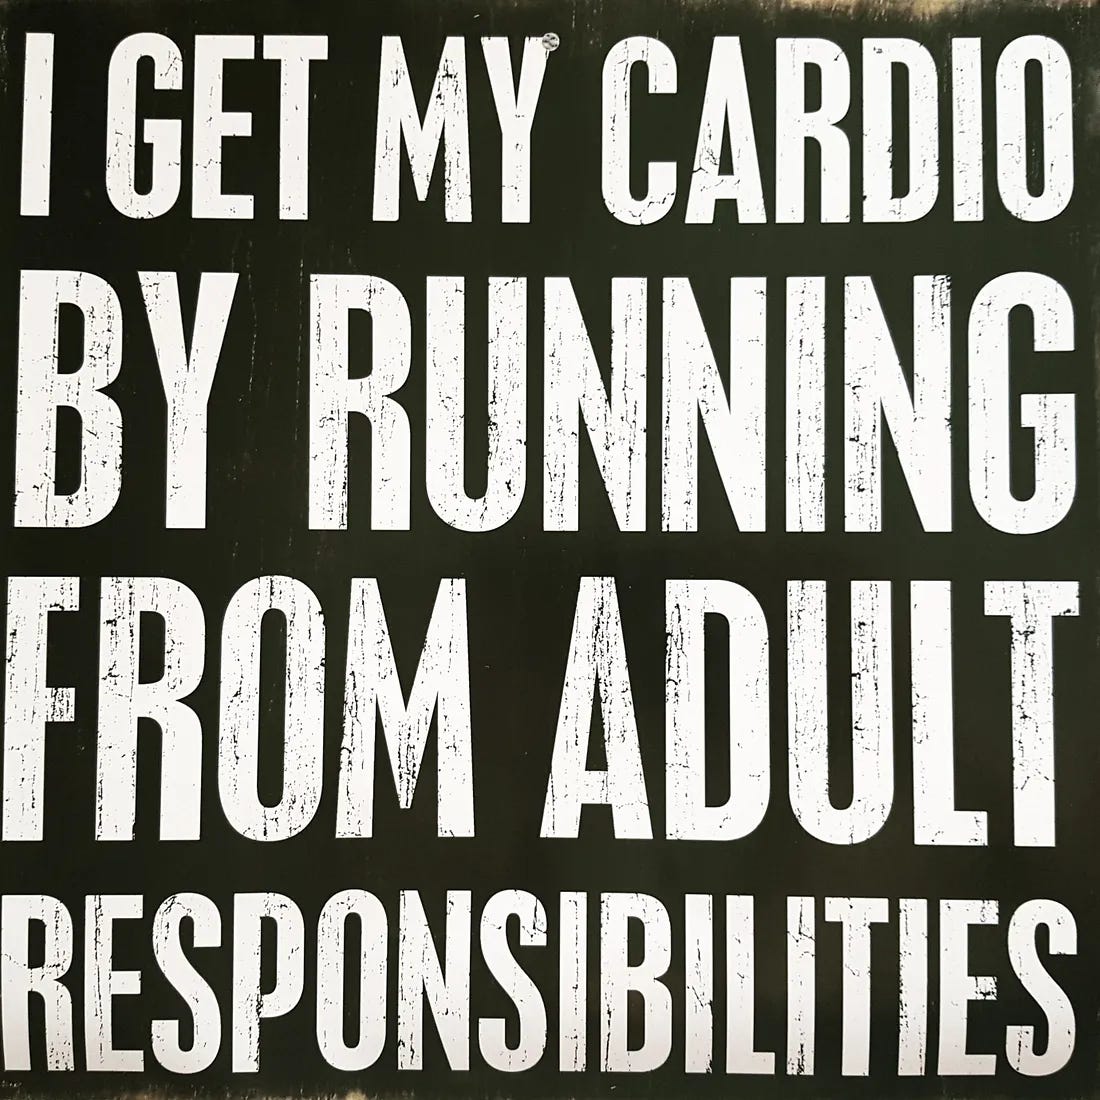 I get my cardio by running from adult responsibilities